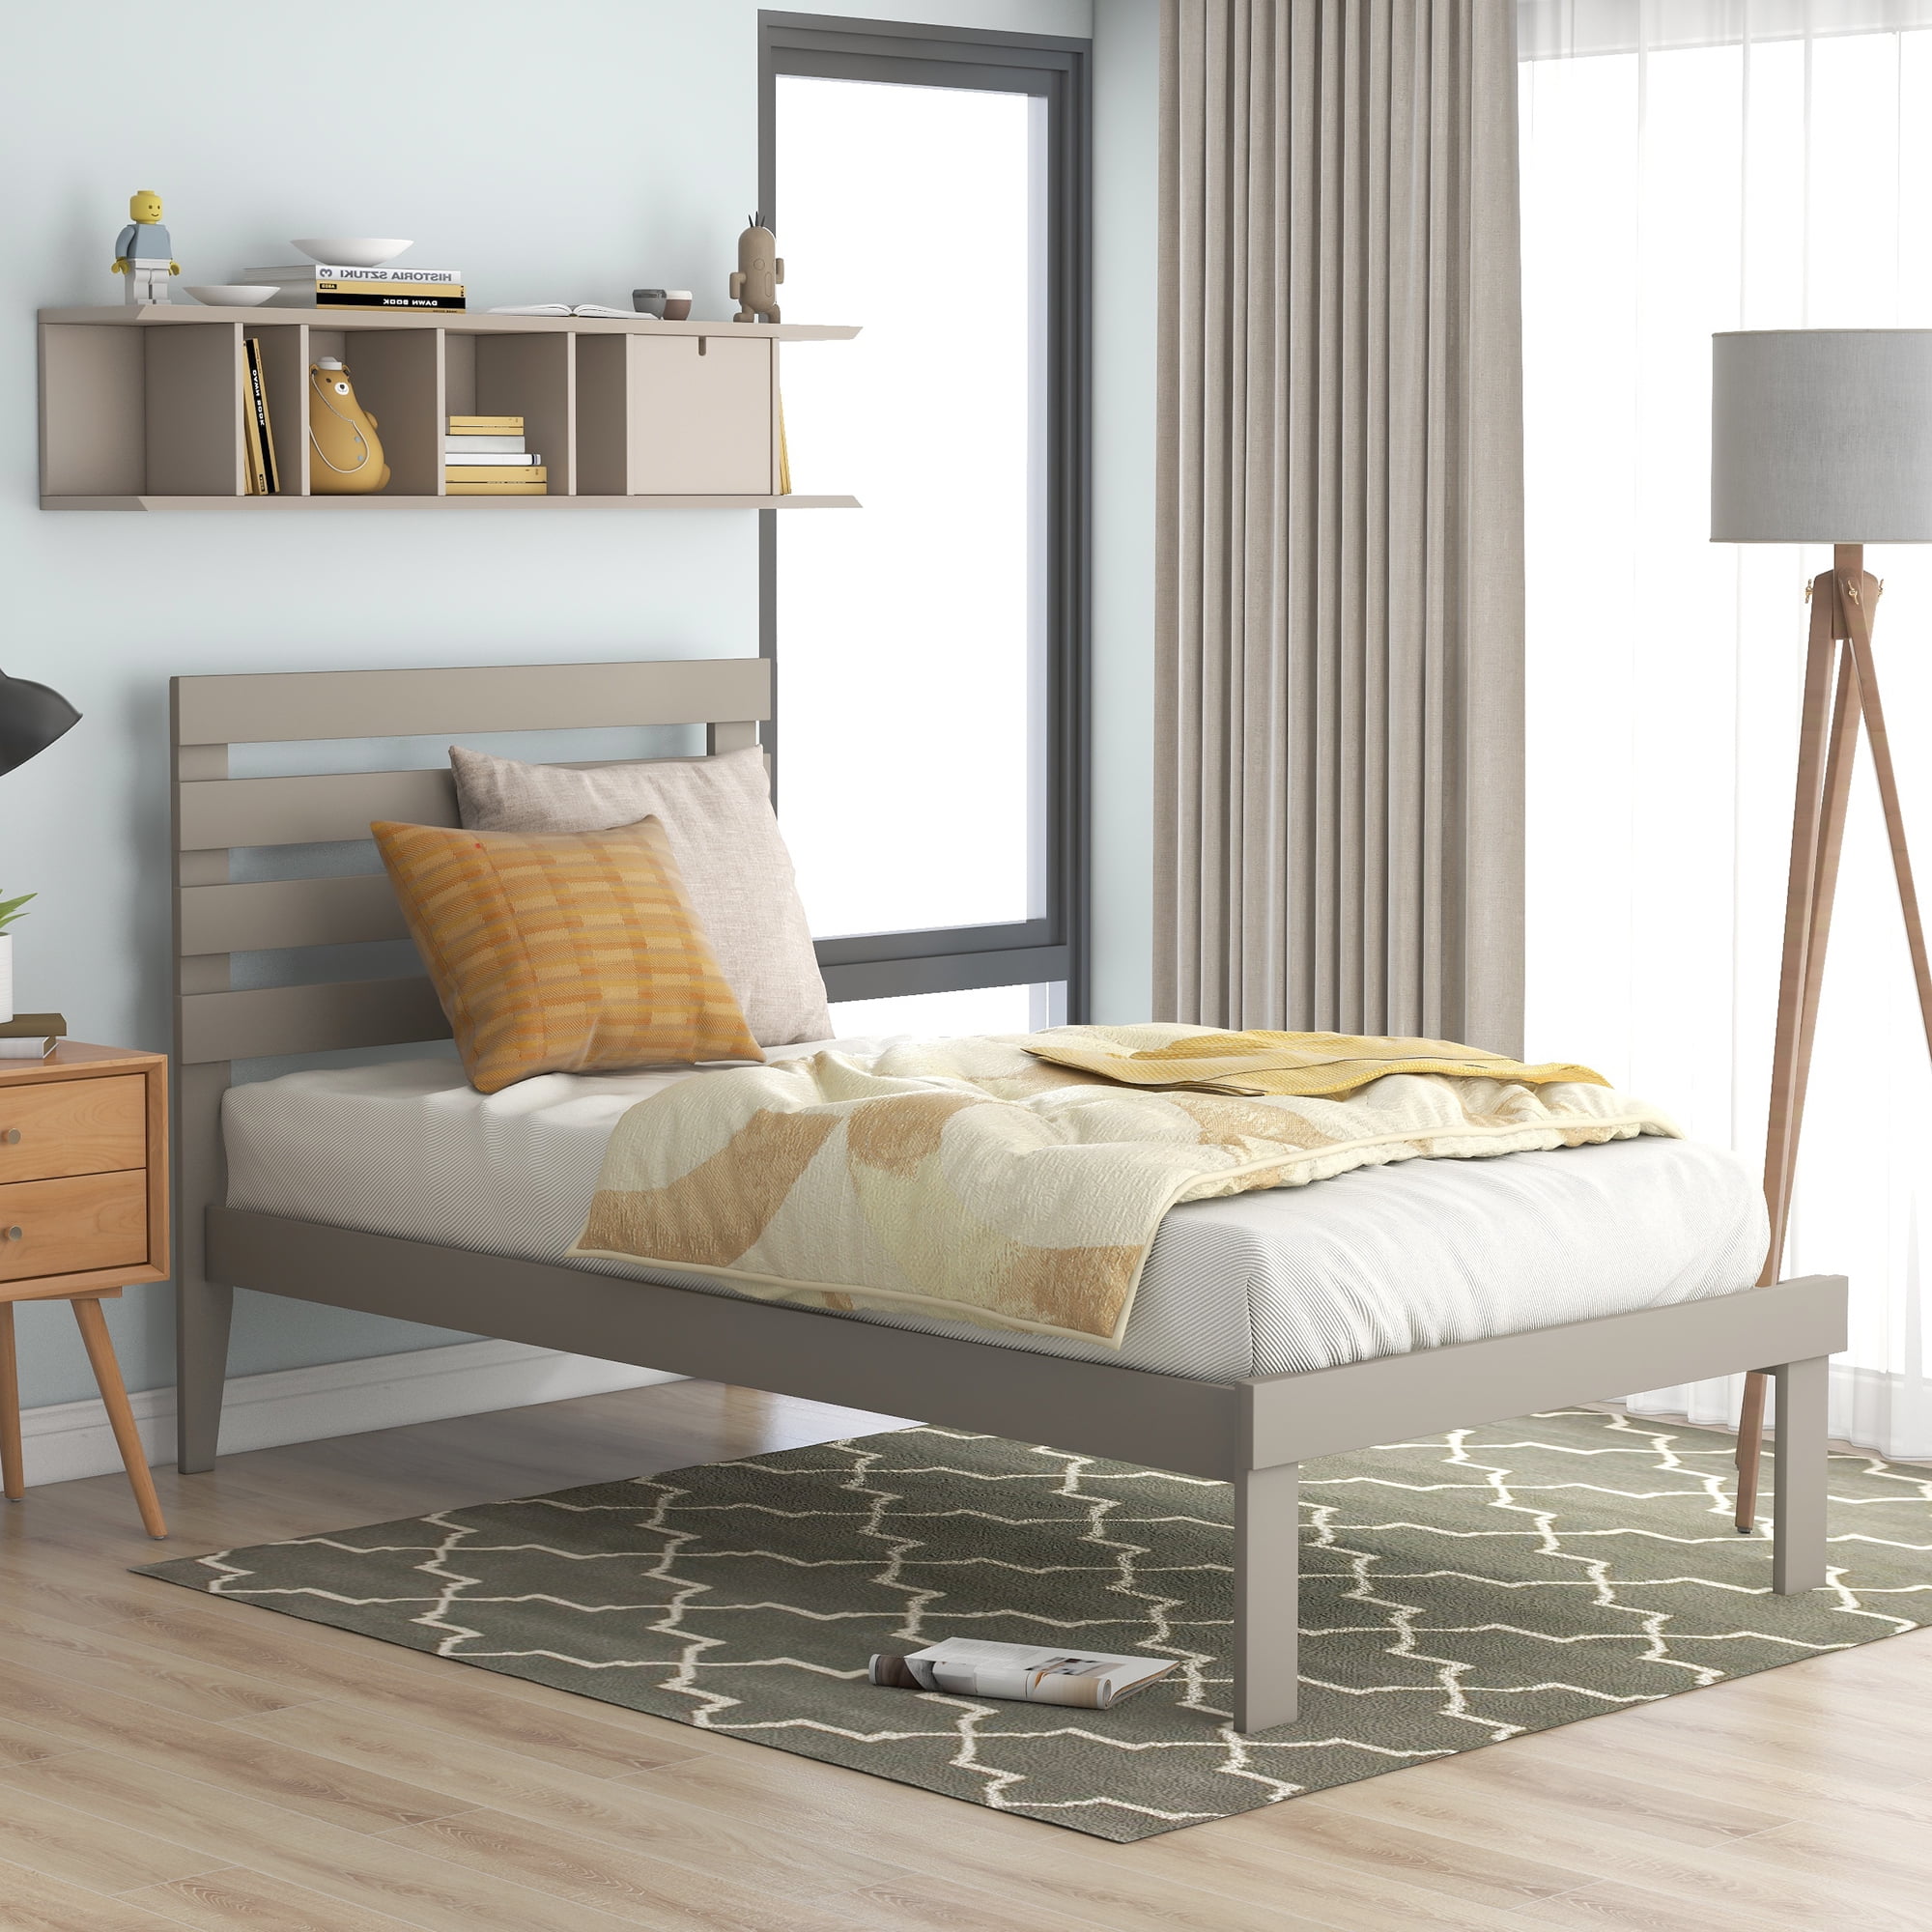 Classic Brands Kiddiewinkle Wood Slat and Metal Platform Bed Frame with Solid Wood Headboard Grey Frame with White Headboard Twin 